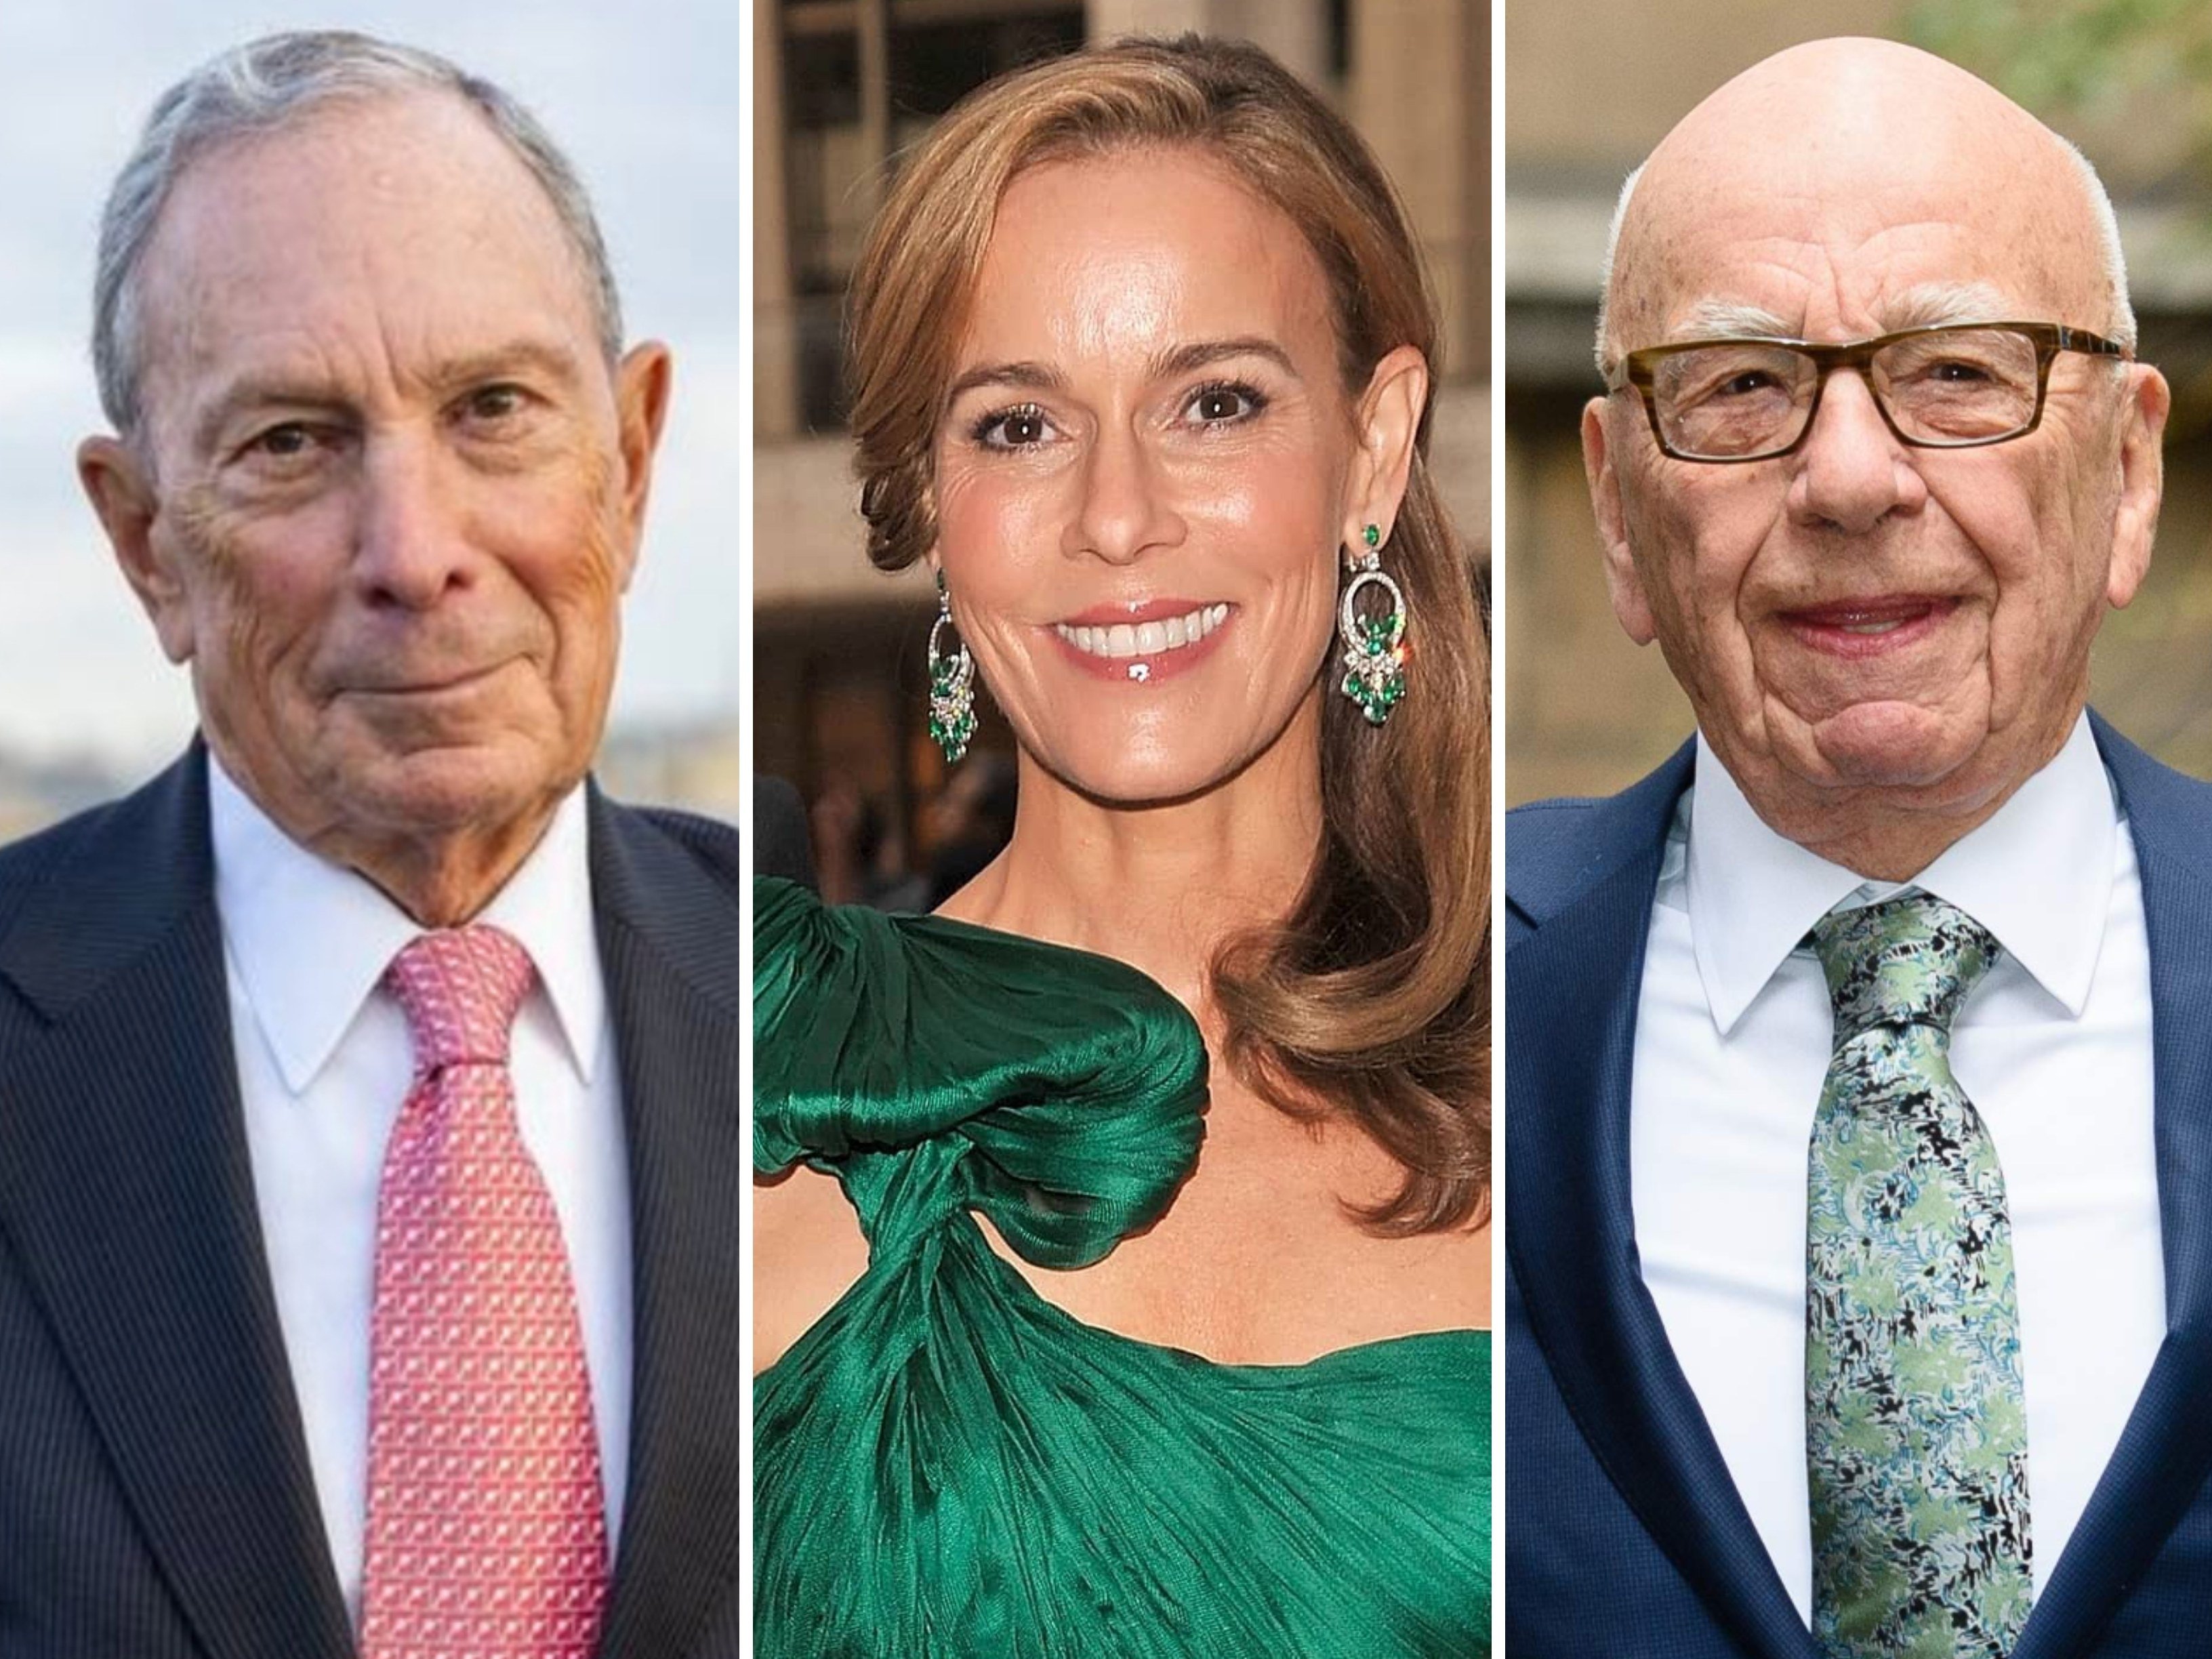 Michael Bloomberg, Julia Koch and Rupert Murdoch are three of the richest people in New York. Photos: @mikebloomberg, @julia_margaret_flesher_koch/Instagram; AFP